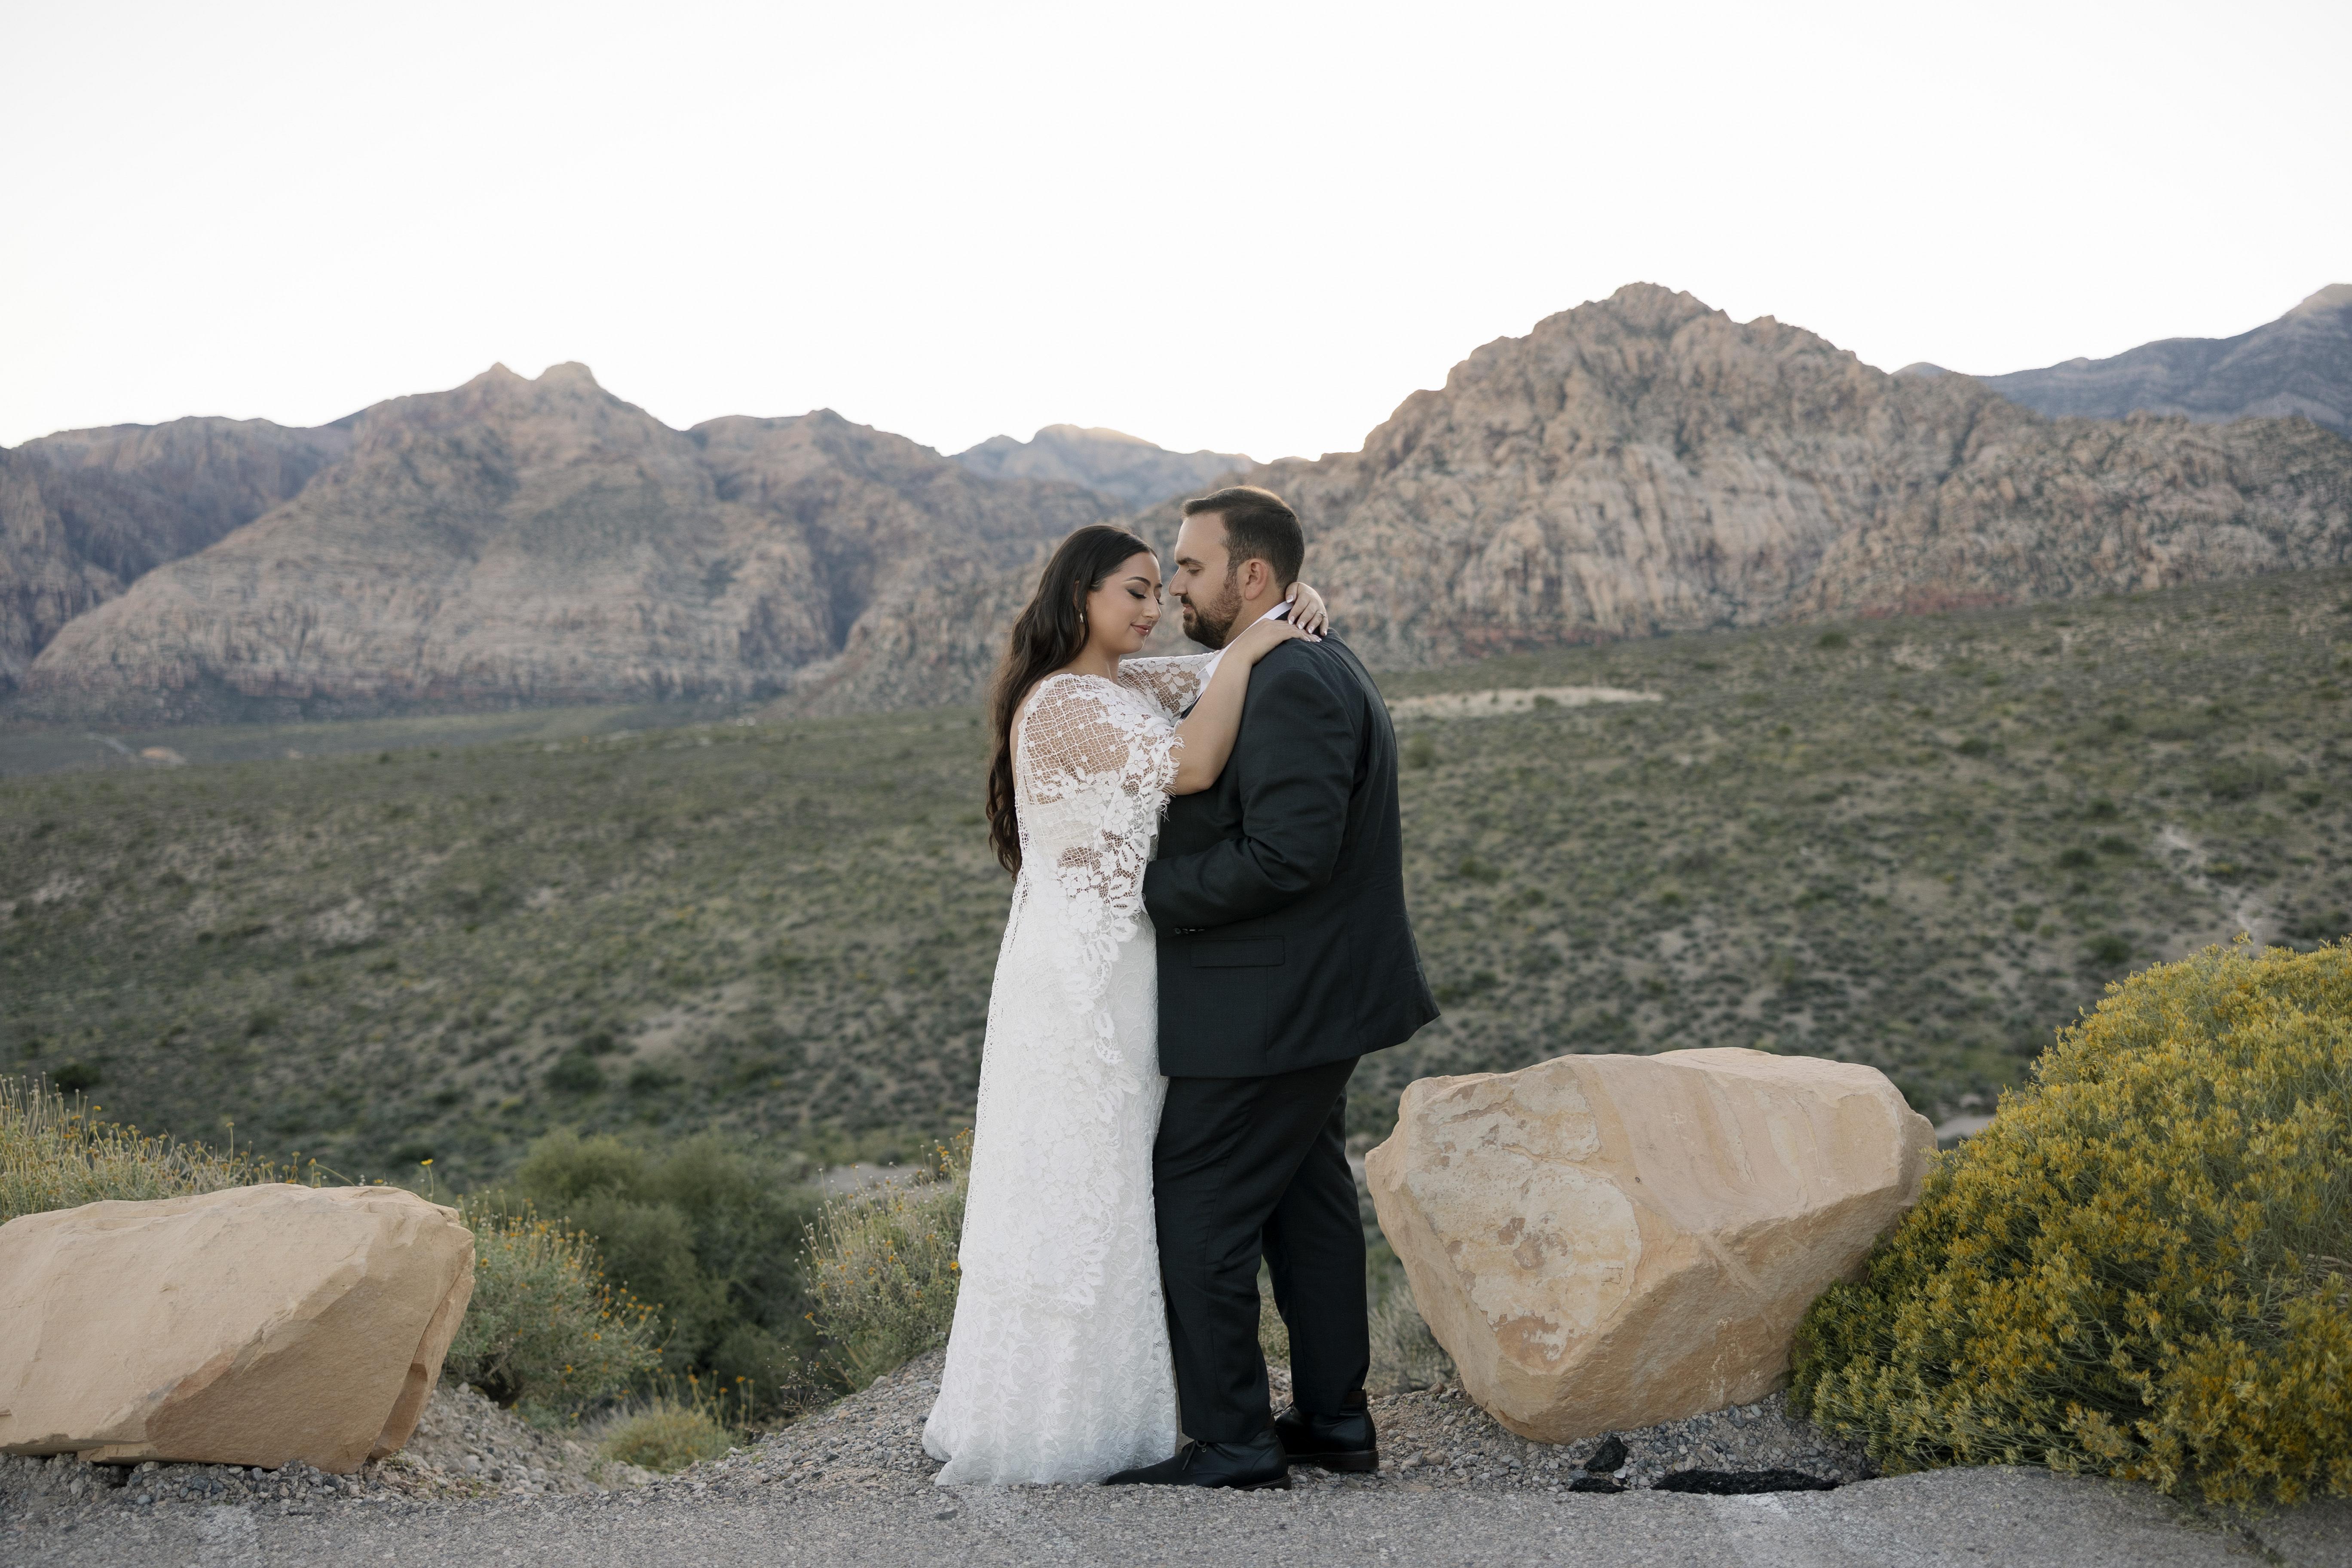 The Wedding Website of Danielle Massis and Jacob Bateh